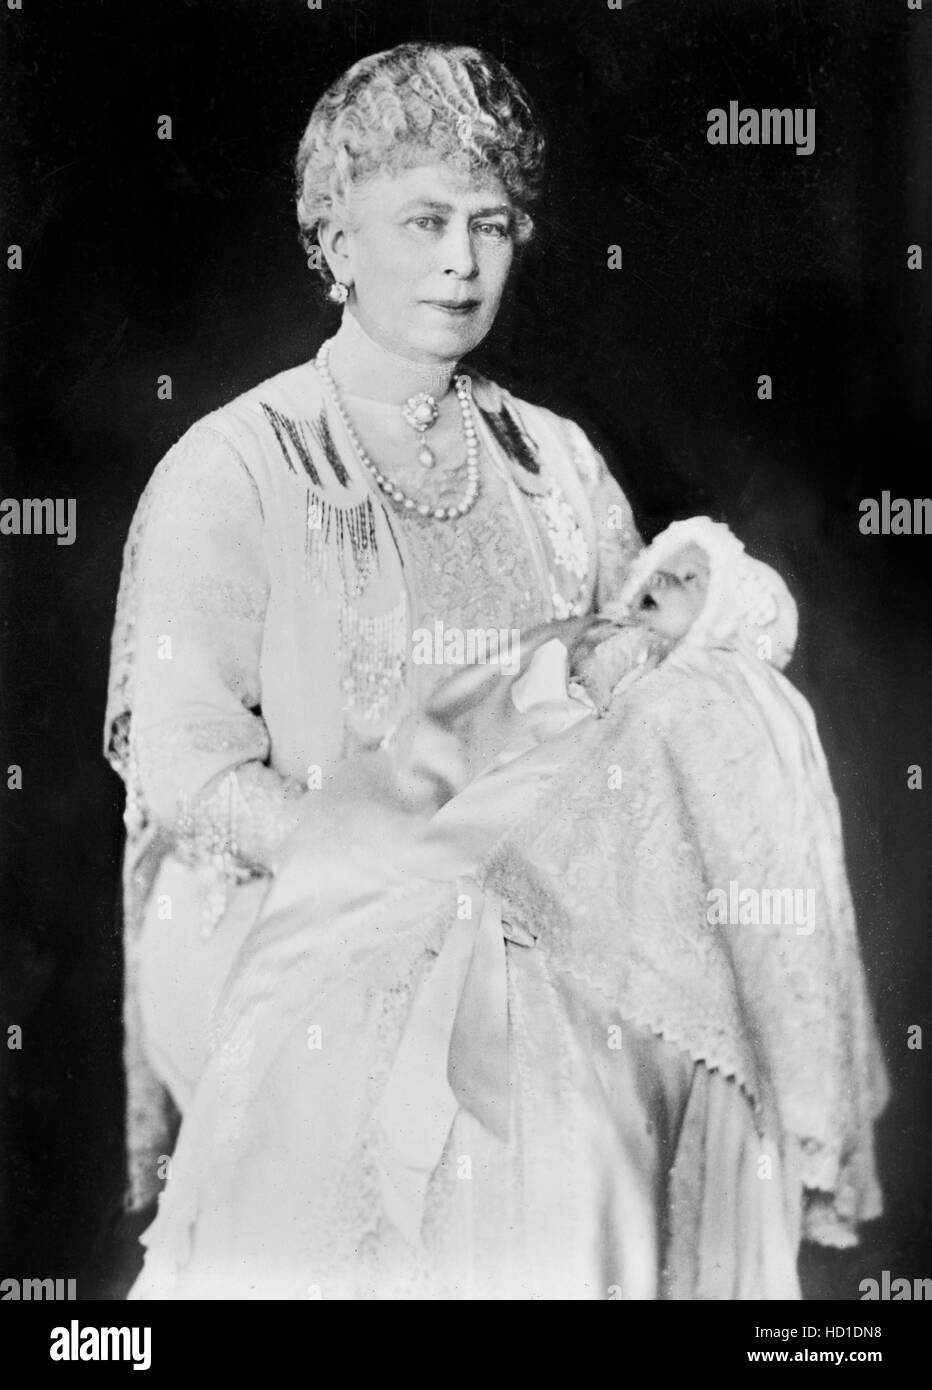 Queen Mary with Elizabeth of York, Portrait, London, England, UK, Bain News Service, 1926 Stock Photo